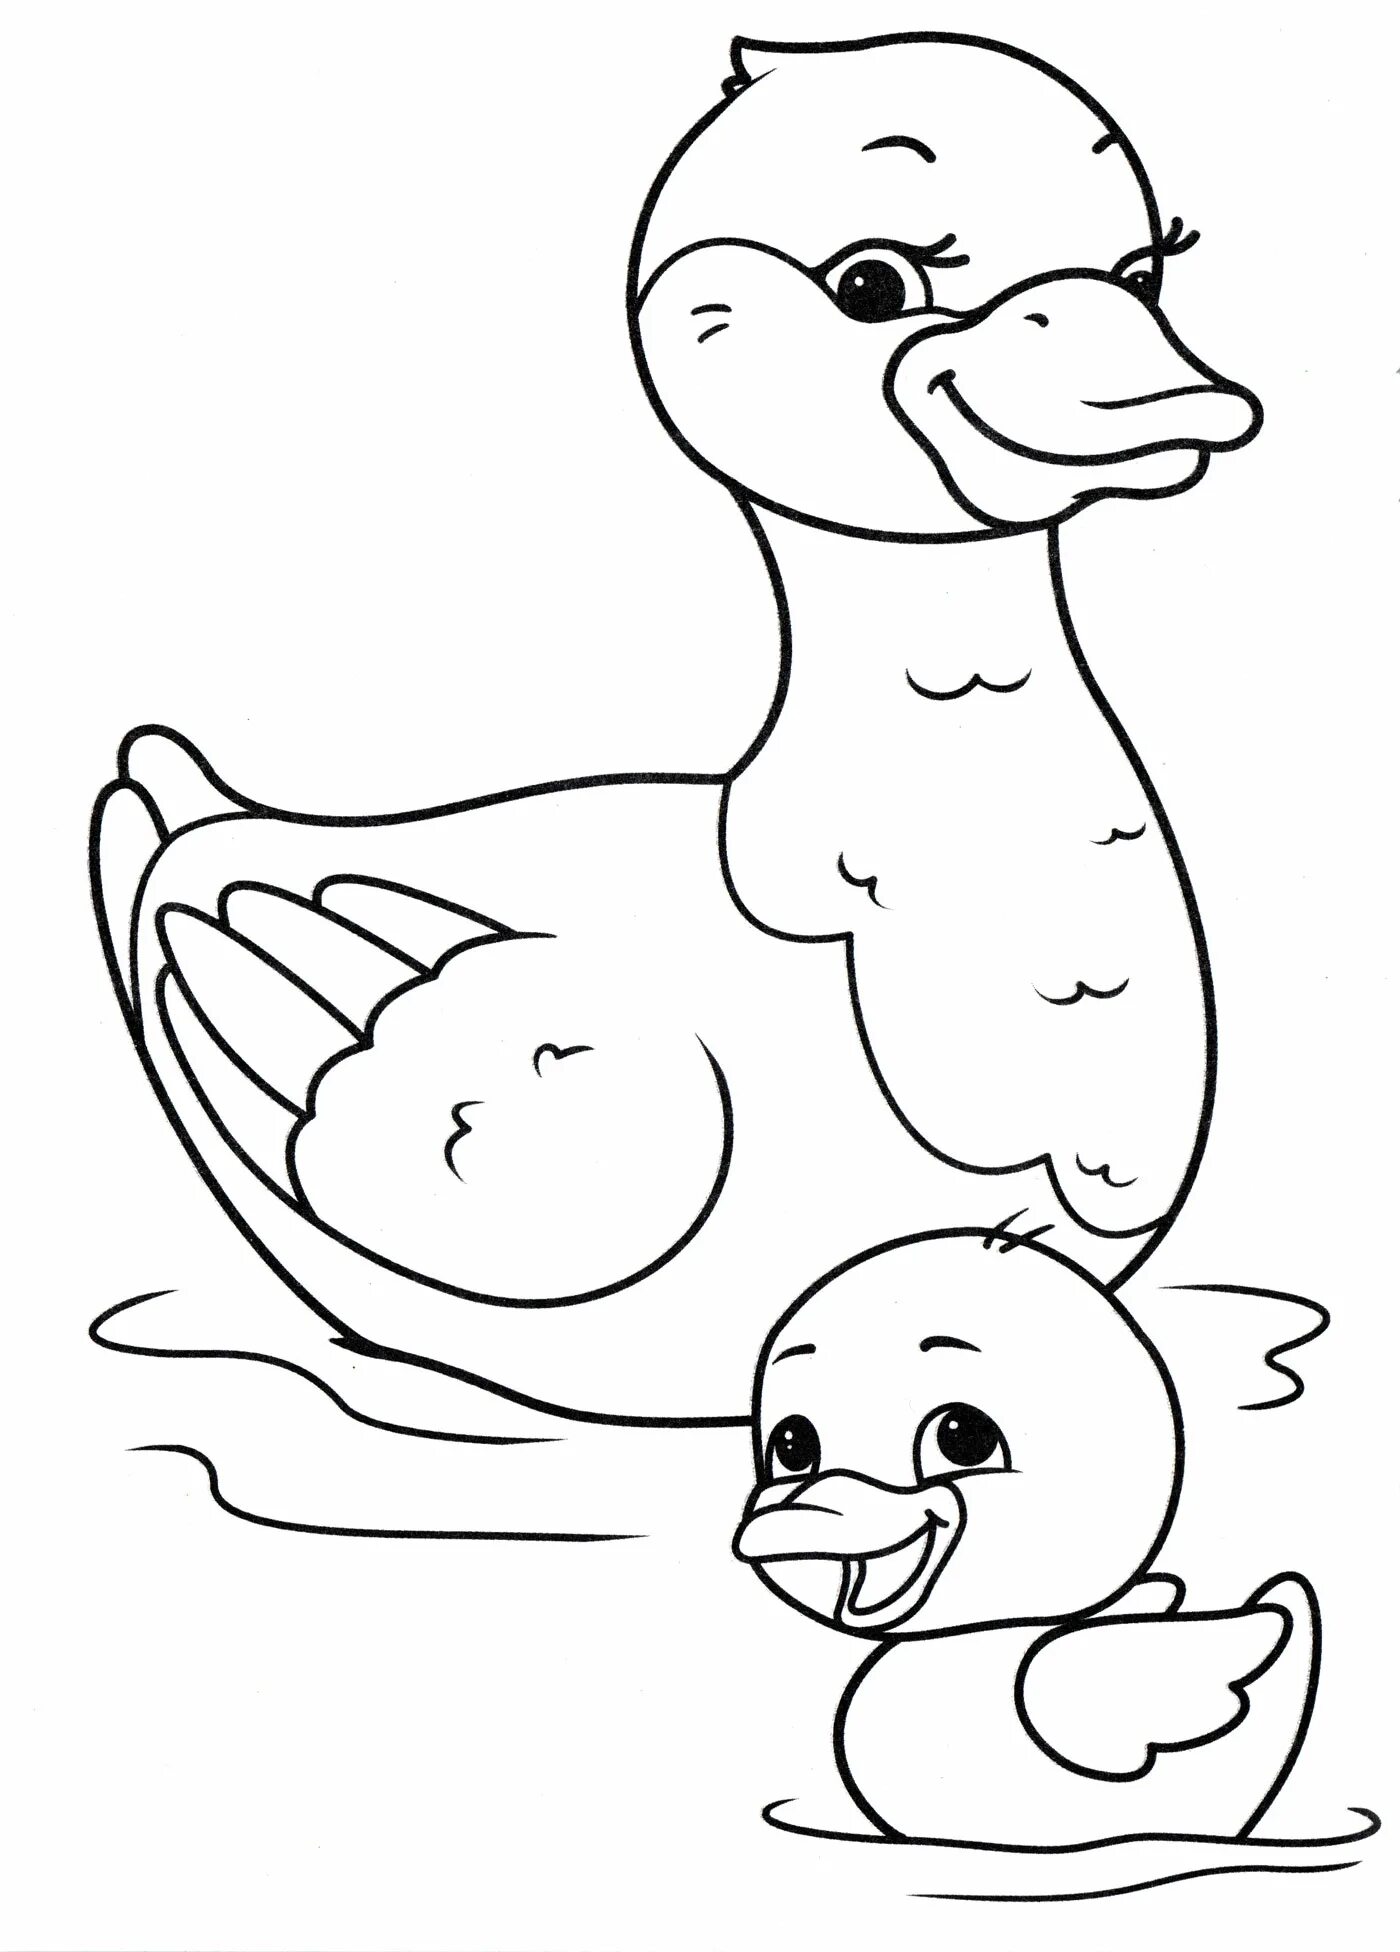 Duck with duck #11